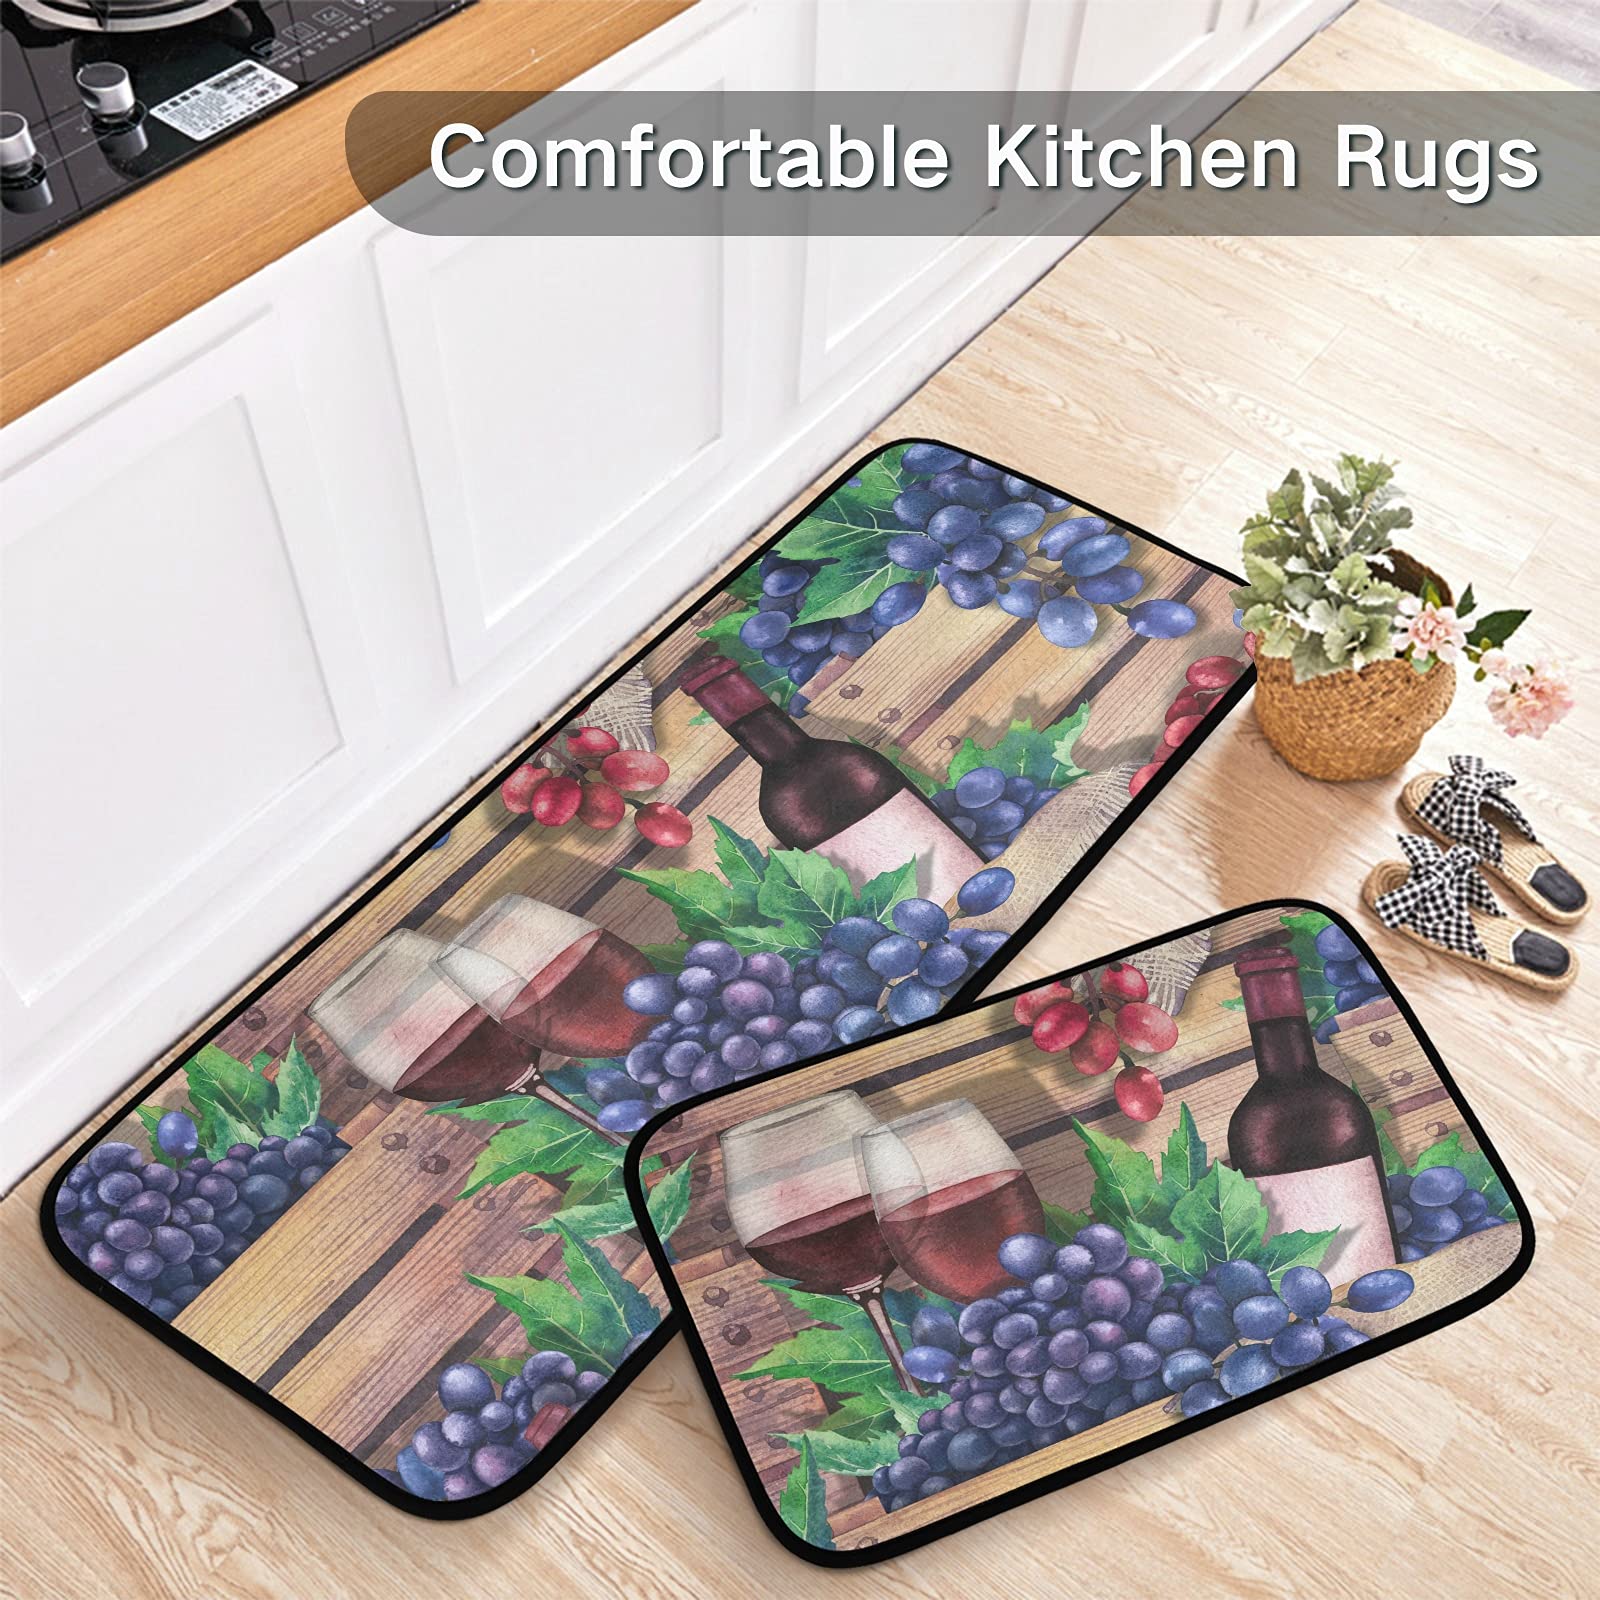 ALAZA Wooden Boxes with Bottles Glasses of Red Wine and Grapes Pattern Kitchen Rug Set, 2 Piece Set, Non-Slip Floor Mat for Living Room Bedroom Dorm Home Decor, 19.7 x 27.6 Inch + 19.7 x 47.2 Inch